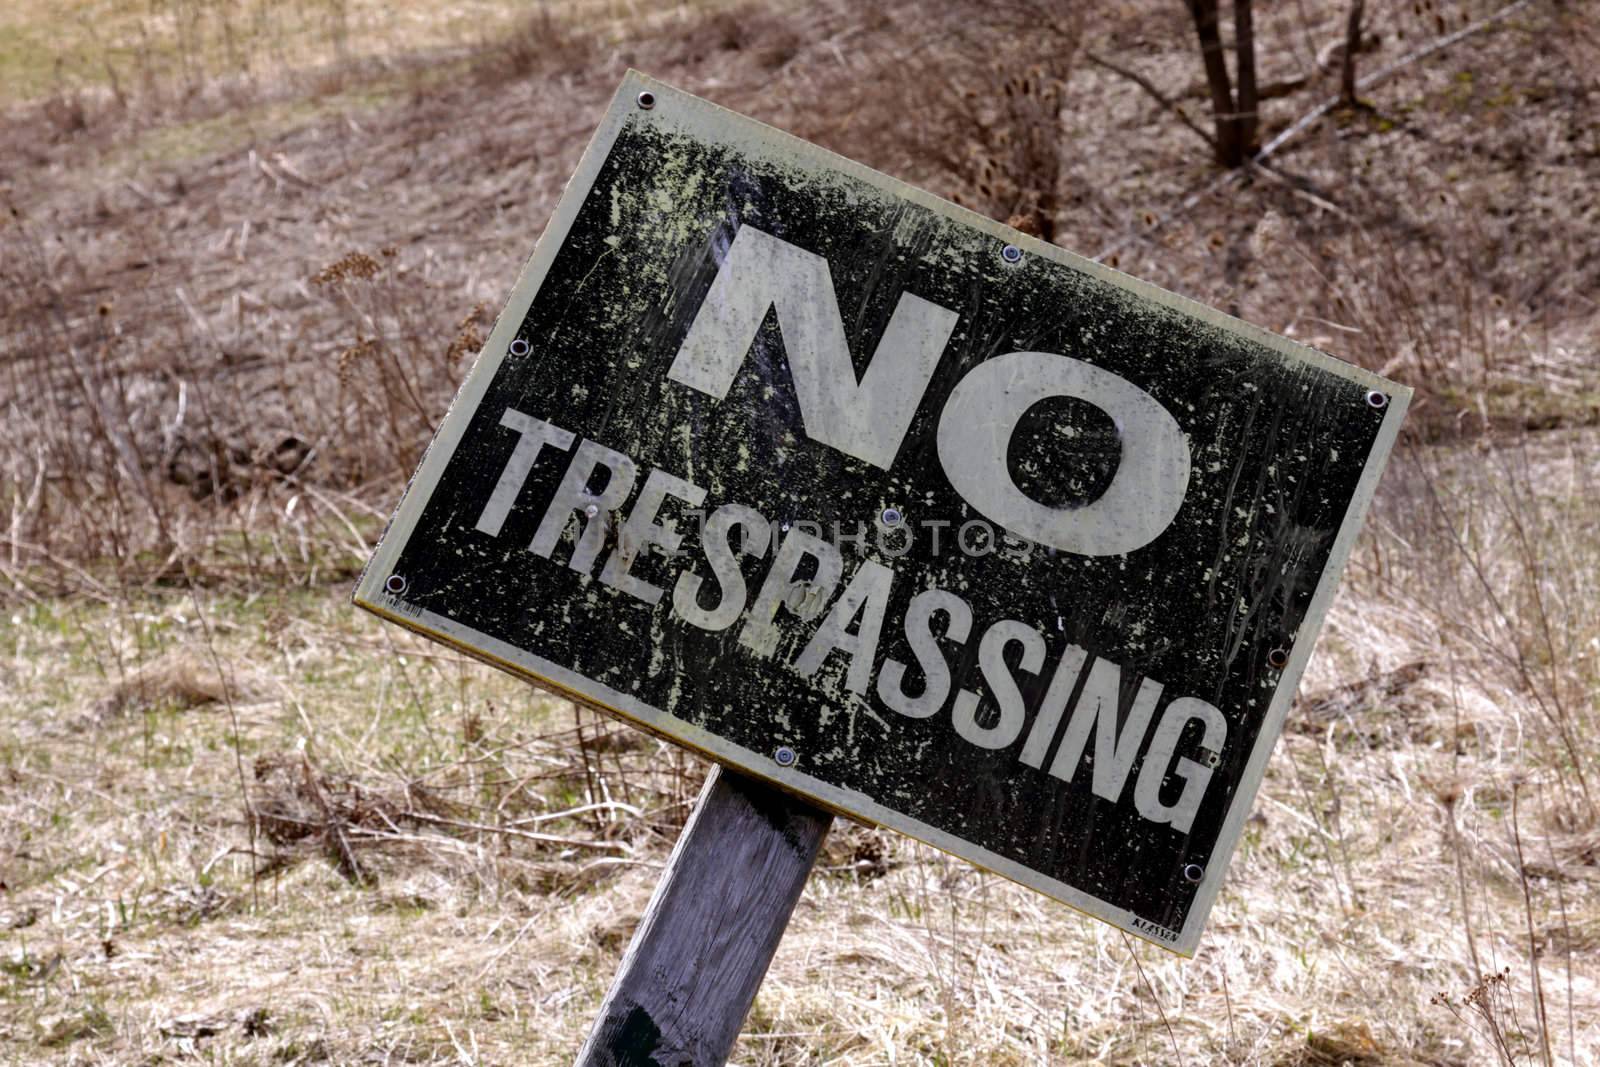 No Trespassing Sign Close-Up
 by ca2hill